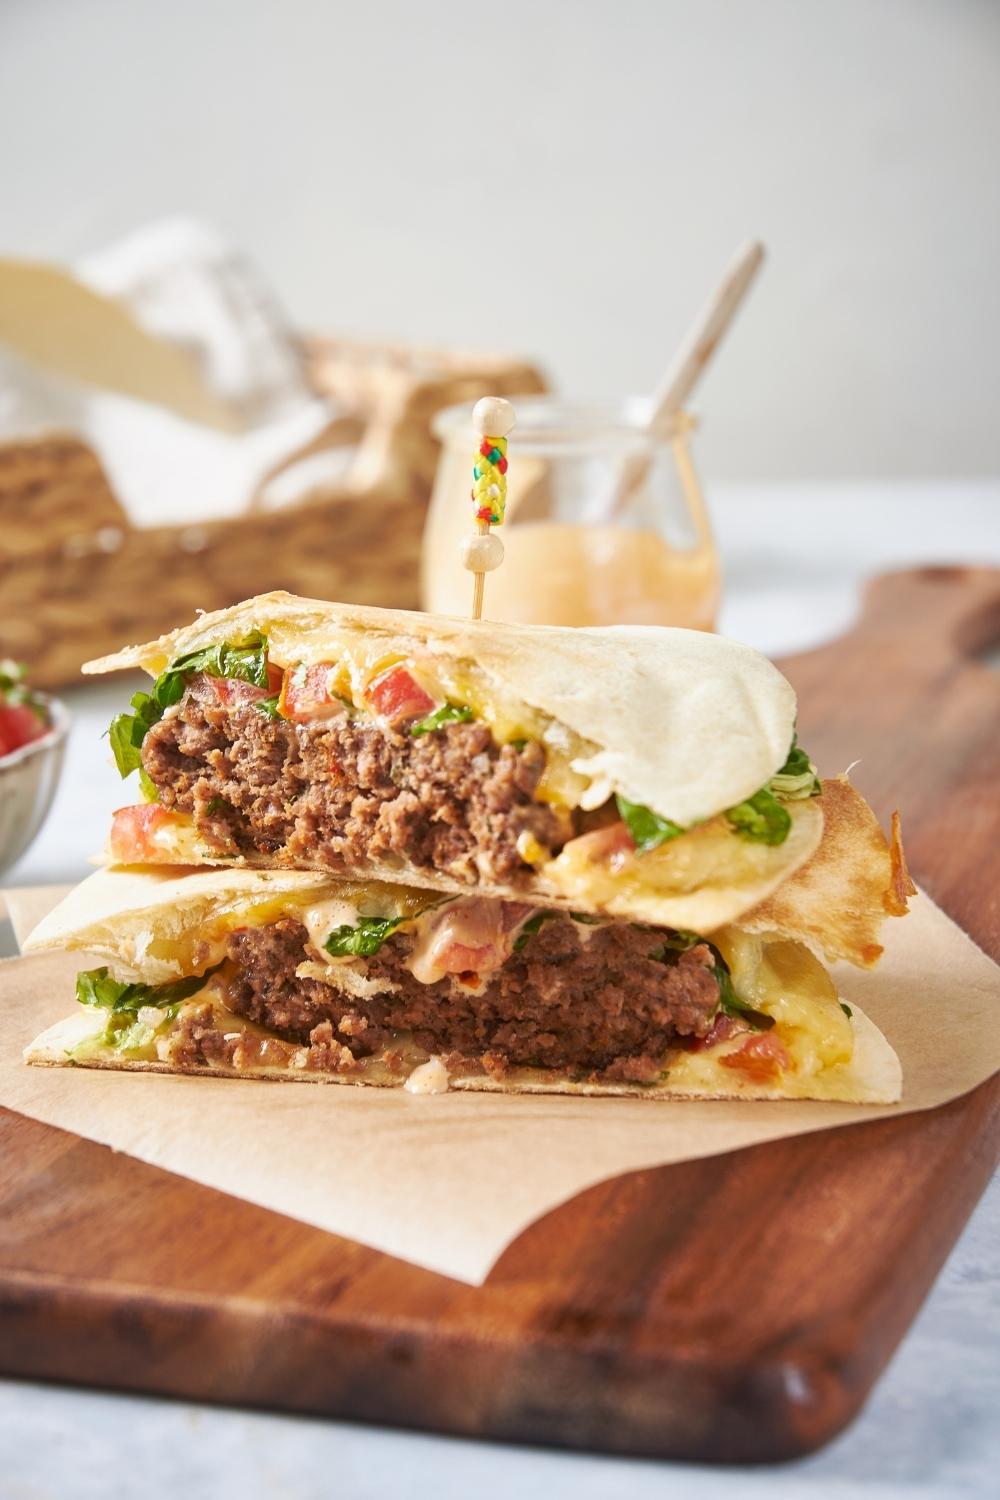 Quesadilla burger sliced in half, stacked on top of each other, on a piece of parchment paper on a wood cutting board, with a toothpick stuck through the burgers. There is an empty jar of spicy mayo behind the burgers.